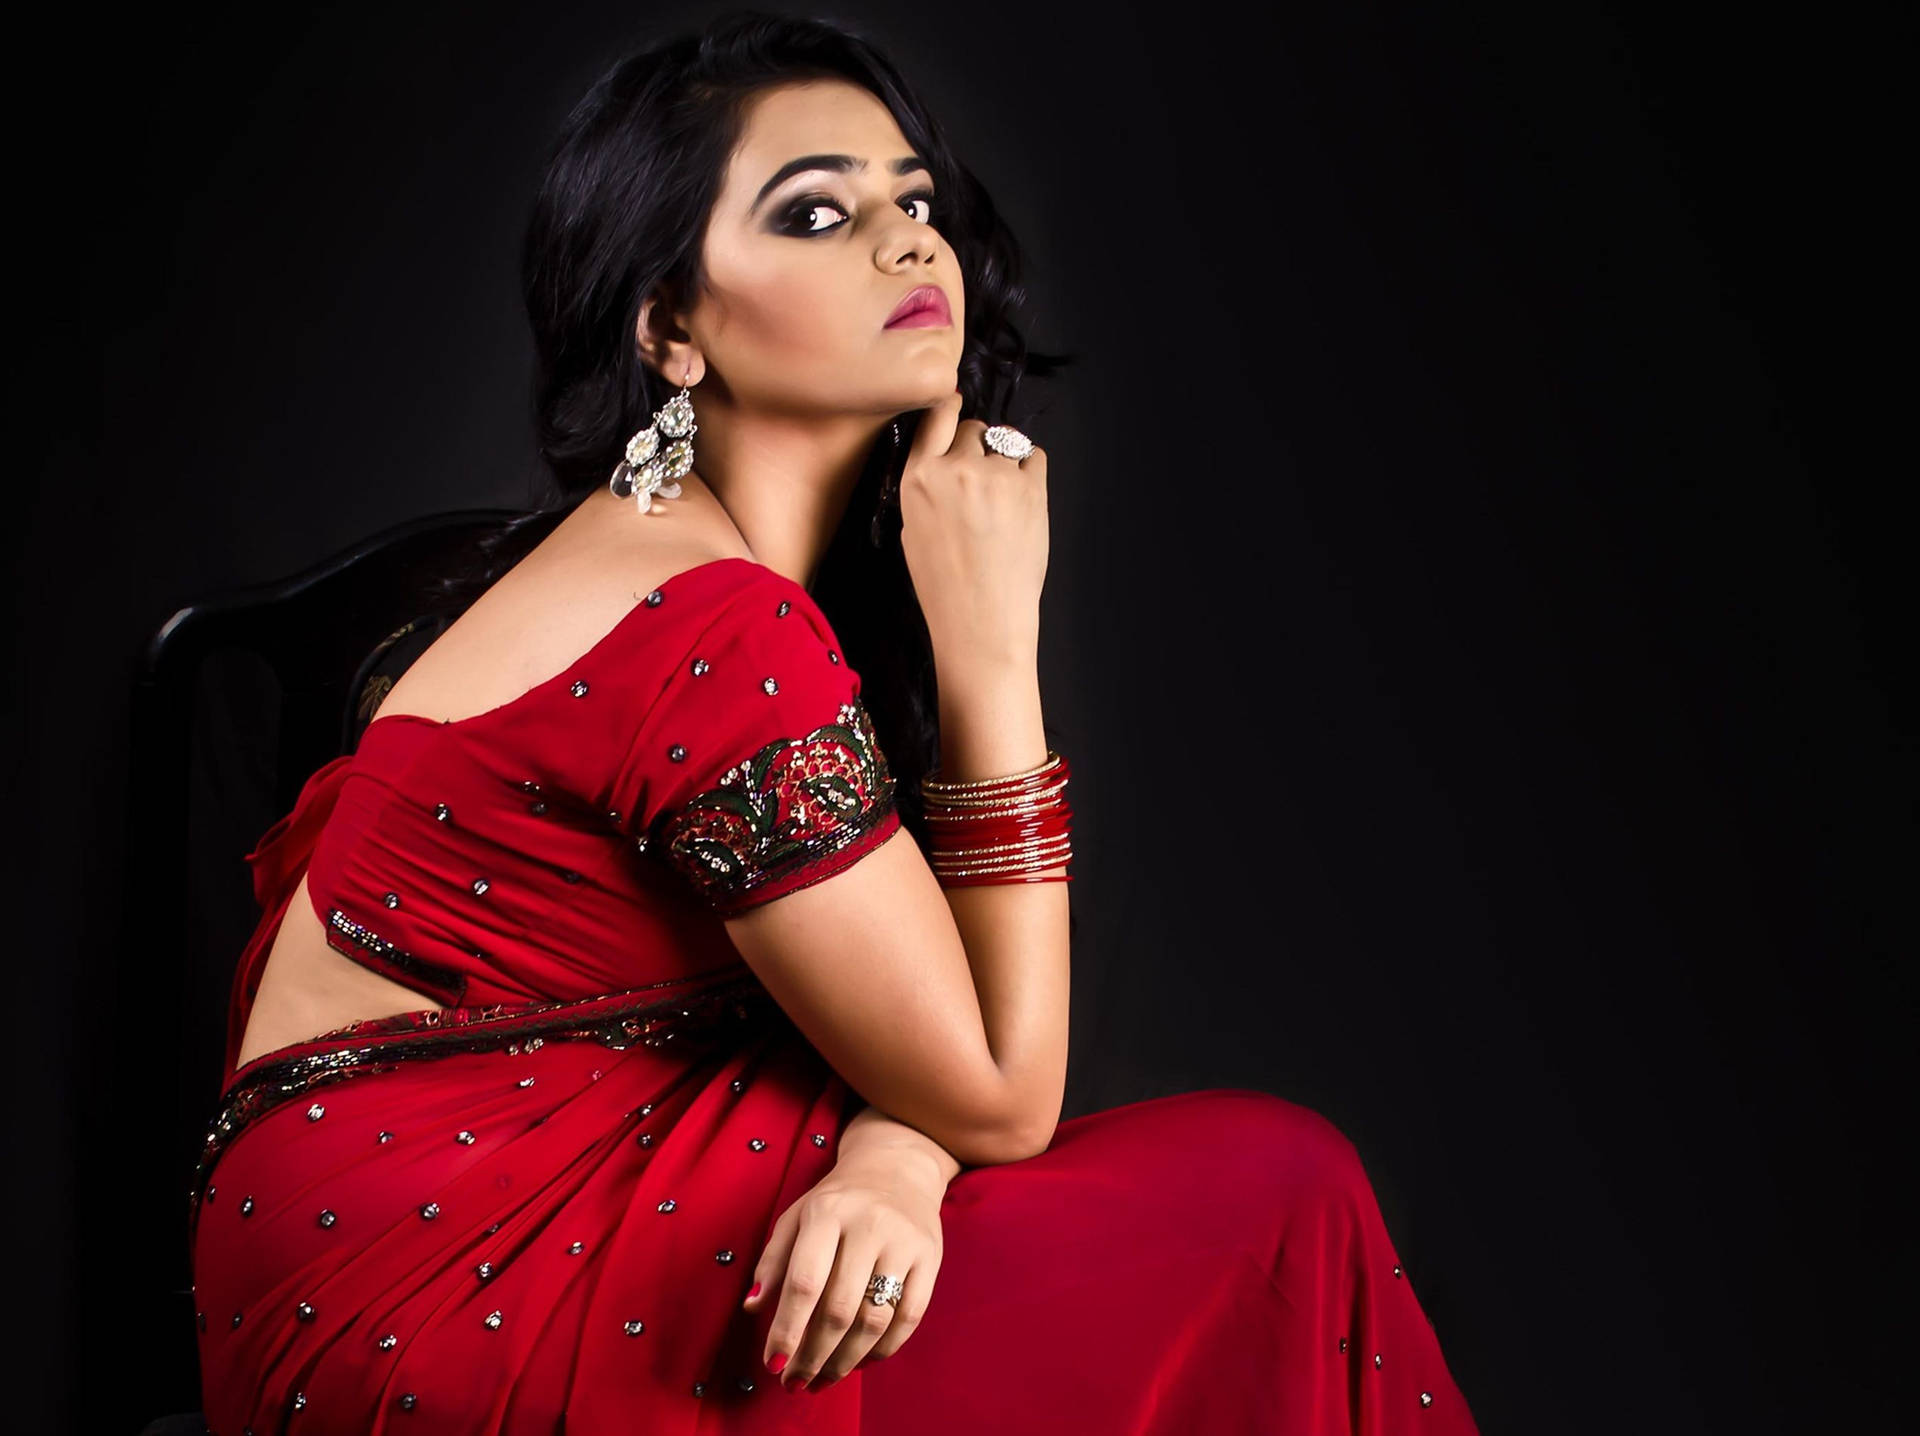 Indian Girl Sultry Red Dress Wallpaper